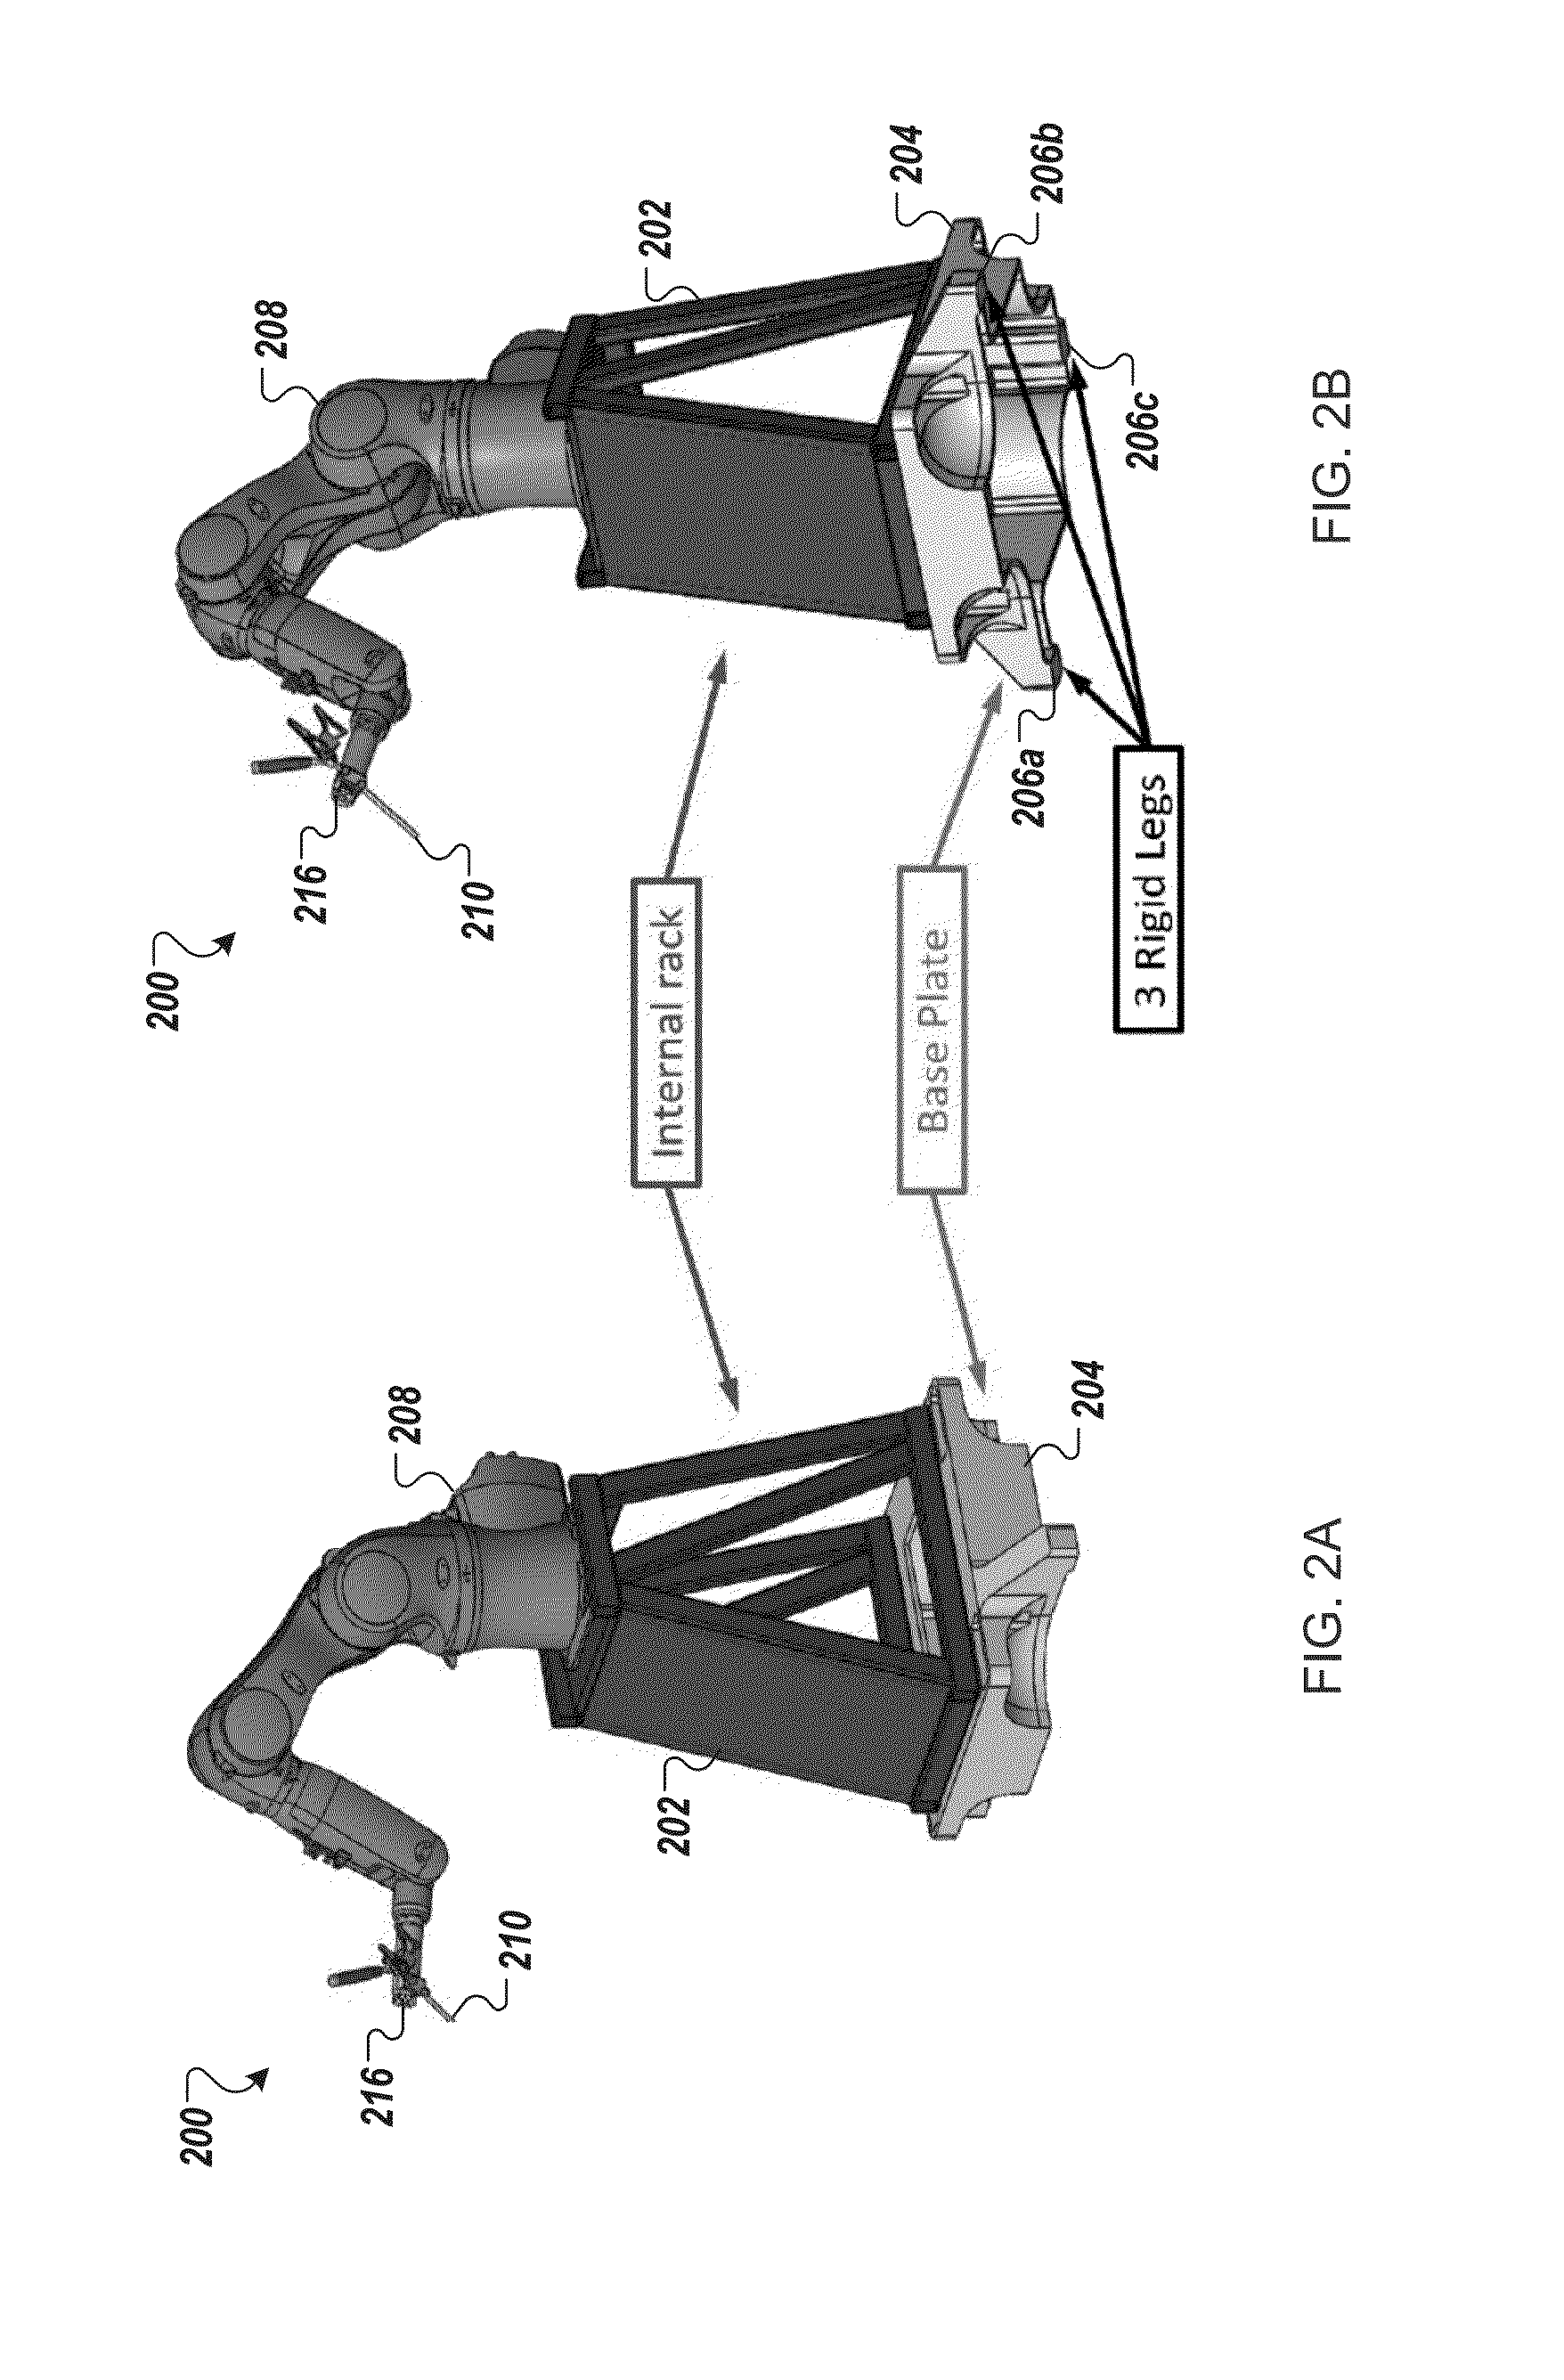 Apparatus, systems, and methods for precise guidance of surgical tools